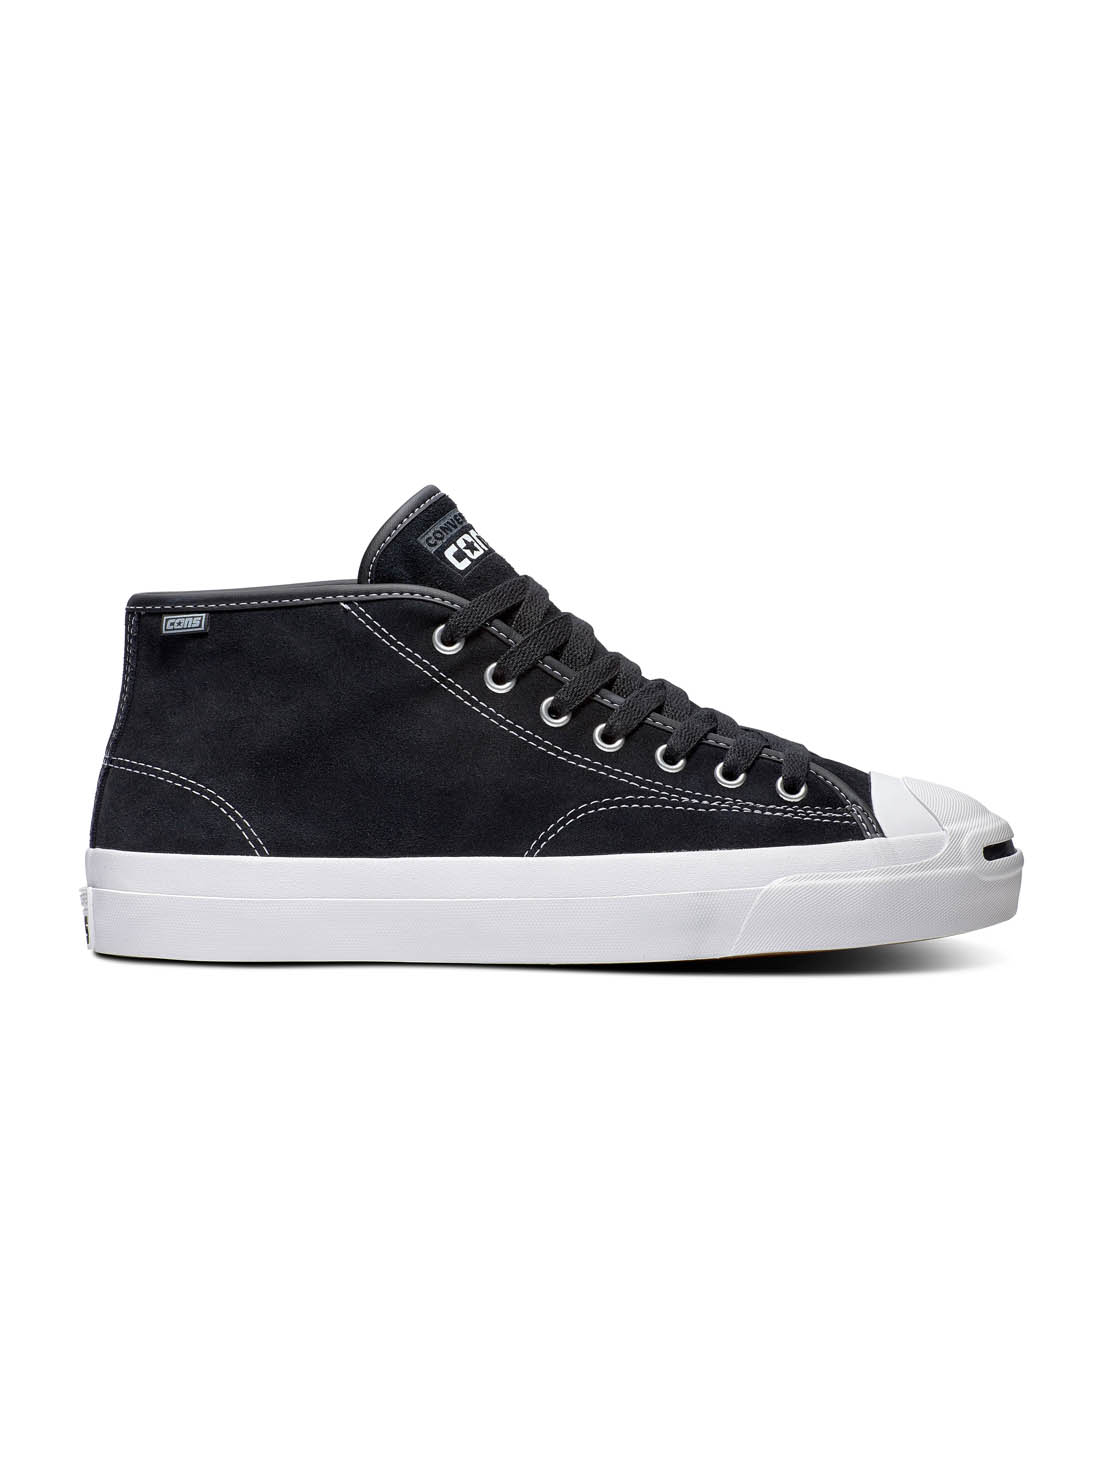 Converse CONS Jack Purcell Pro Mid 